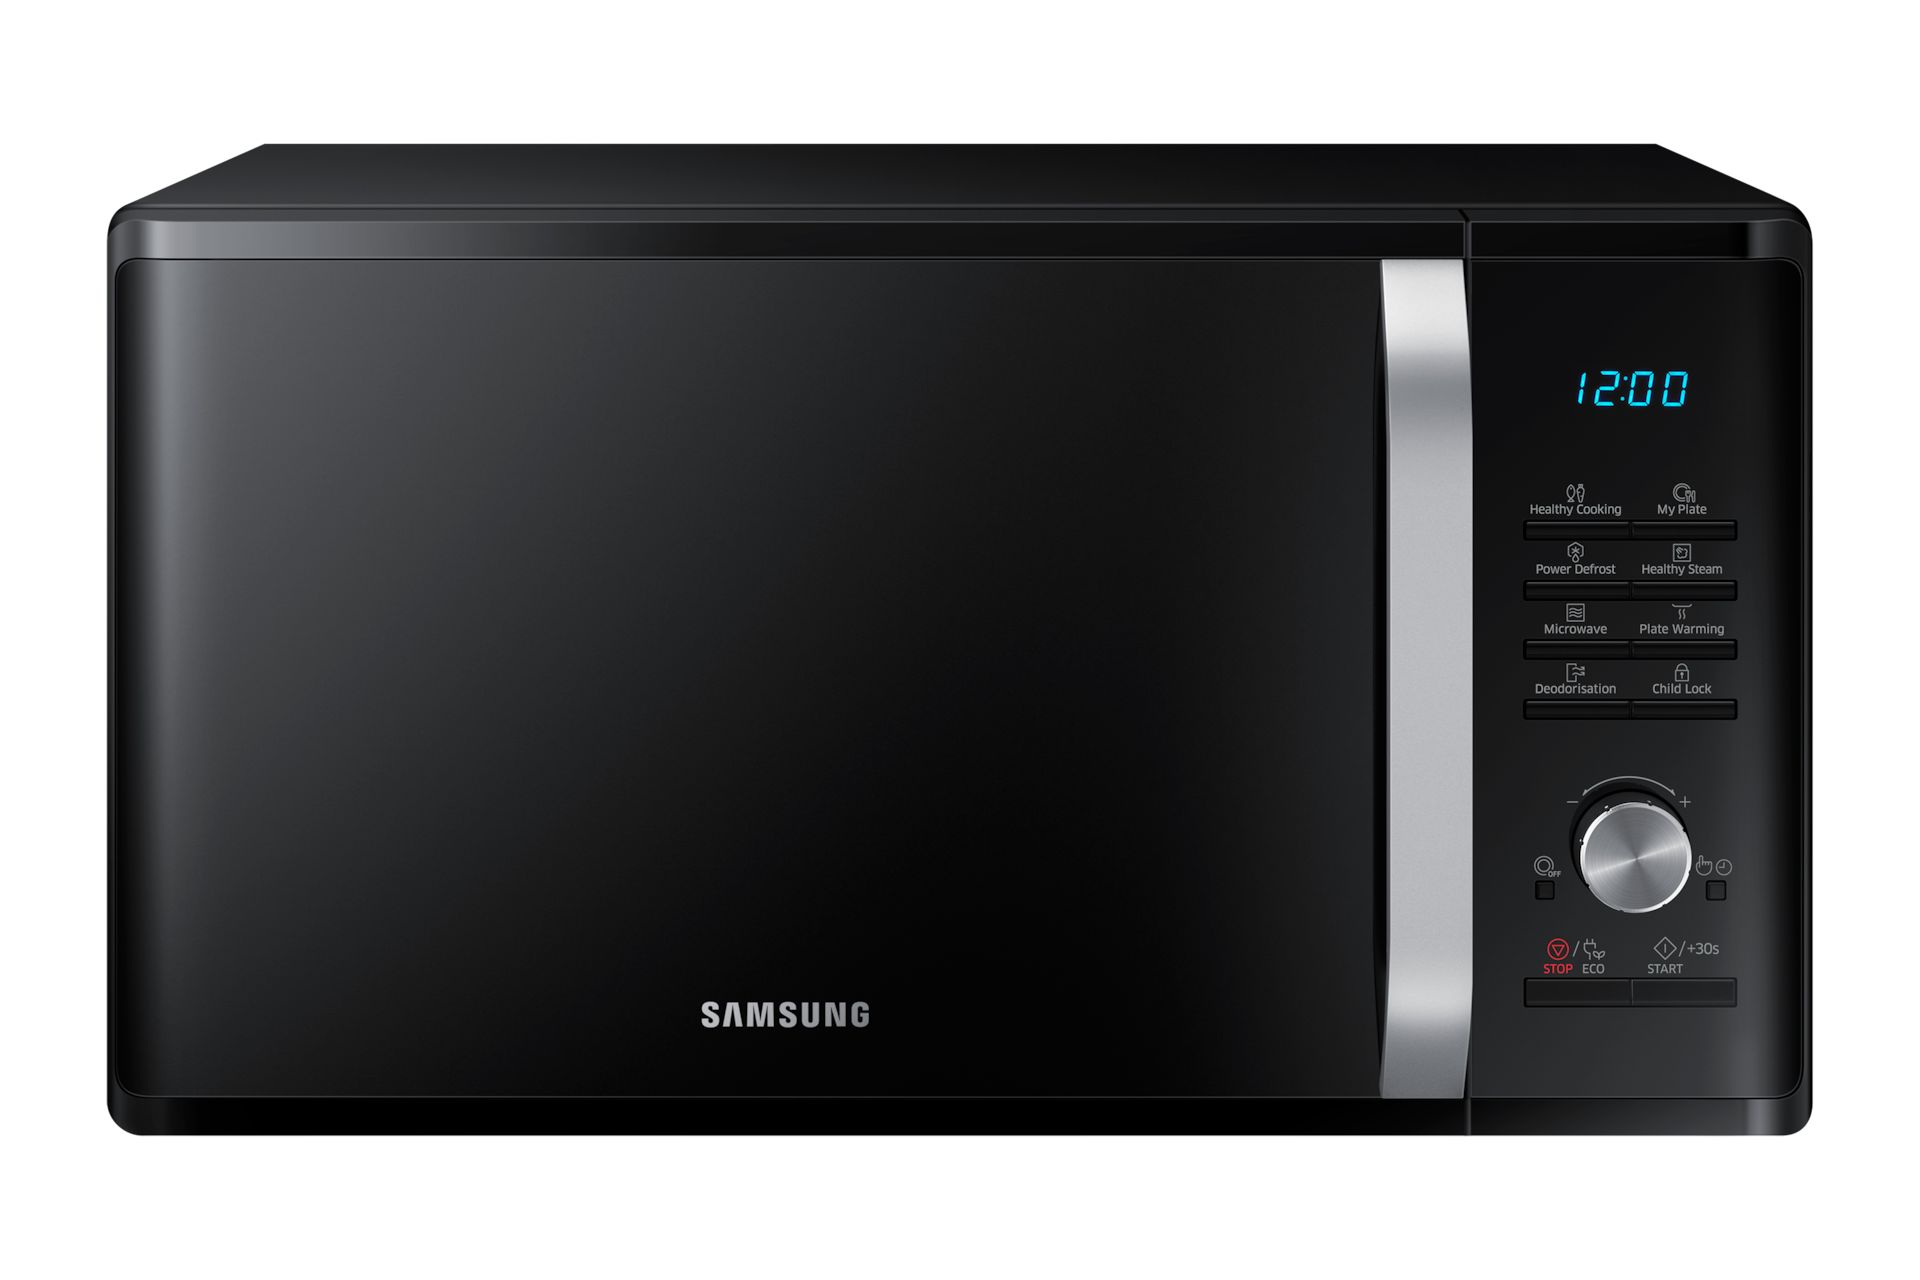 Samsung Solo Microwave Oven (28L, MS28J5255UB/SP) Price in Singapore